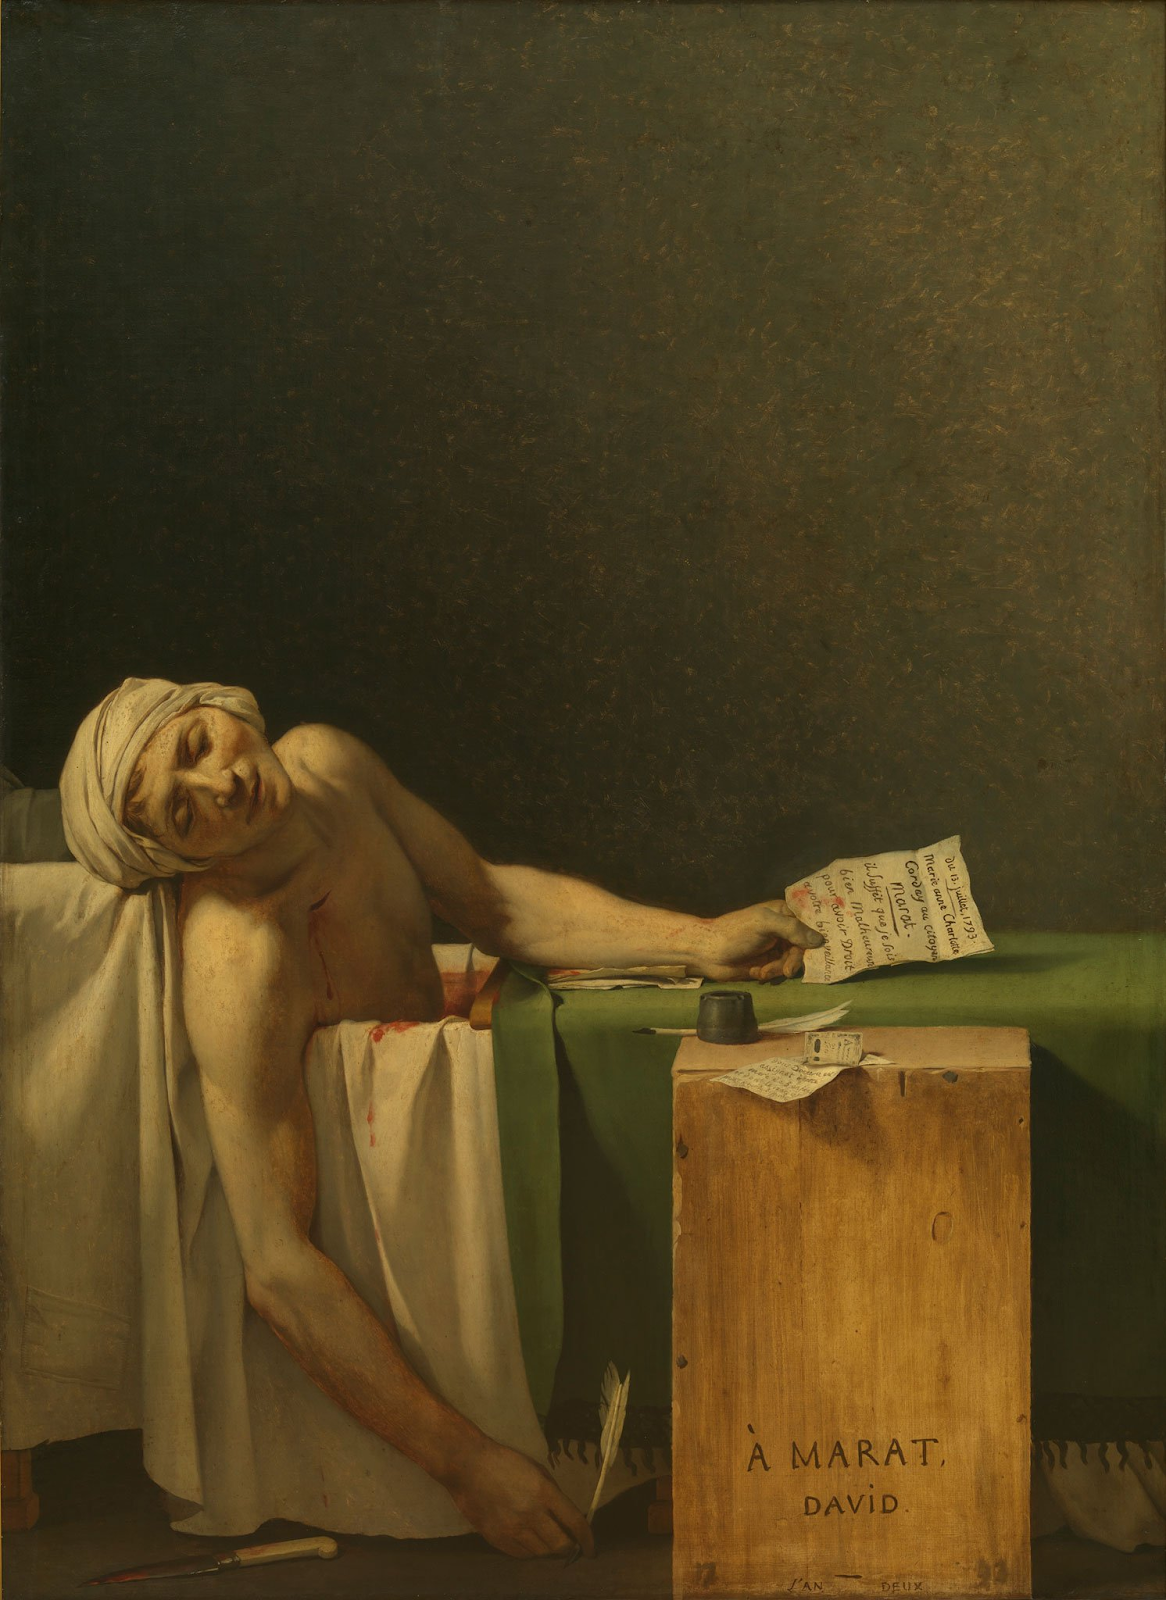 A painting titled "Death of Marat" by Jacques-Louis David. Marat is dead, hanging over the side of a white bath tub. He appears to have been writing, he holds a pen, and an ink pot and paper with writing are nearby. He wears a white turban, and white material is draped over the tub. The material is spotted with splashes of blood and a bloody knife lays on the floor. The top half of the painting is empty, showing only a dark green wall. Marat and his bath, mostly in white, take up the lower half of the painting.